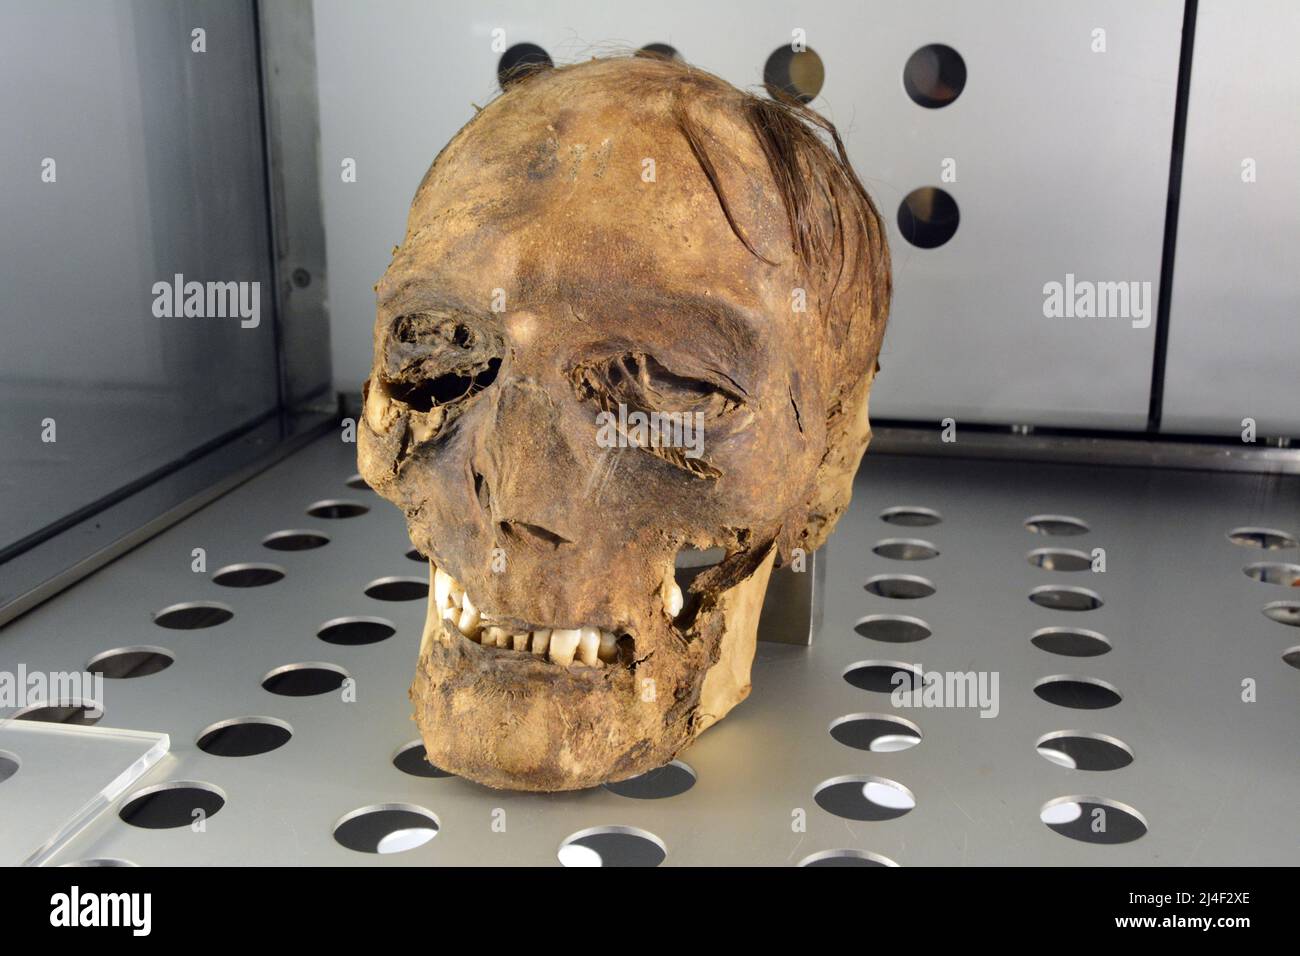 A mummified skull of the Guanche mummies, from the ancient Berber community of Tenerife, on display in a museum in Santa Cruz, Canary Islands, Spain. Stock Photo